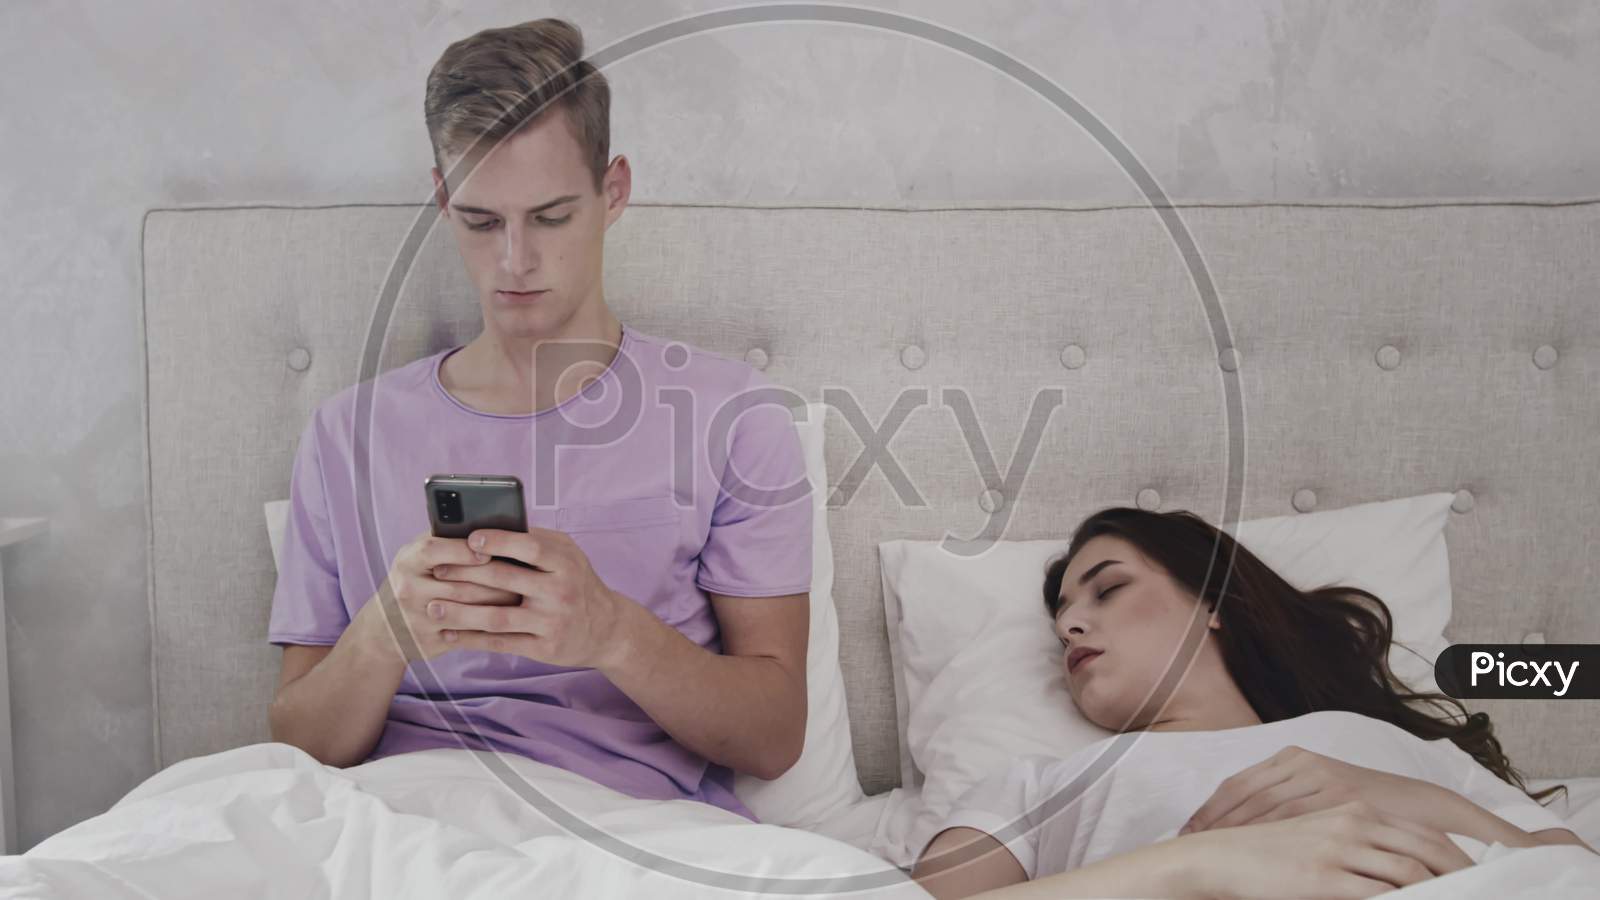 Man Chatting On Phone While Girl Is Sleeping. Man Using Phone In Bed. Girl Sleeping In Bed. Shot On Red